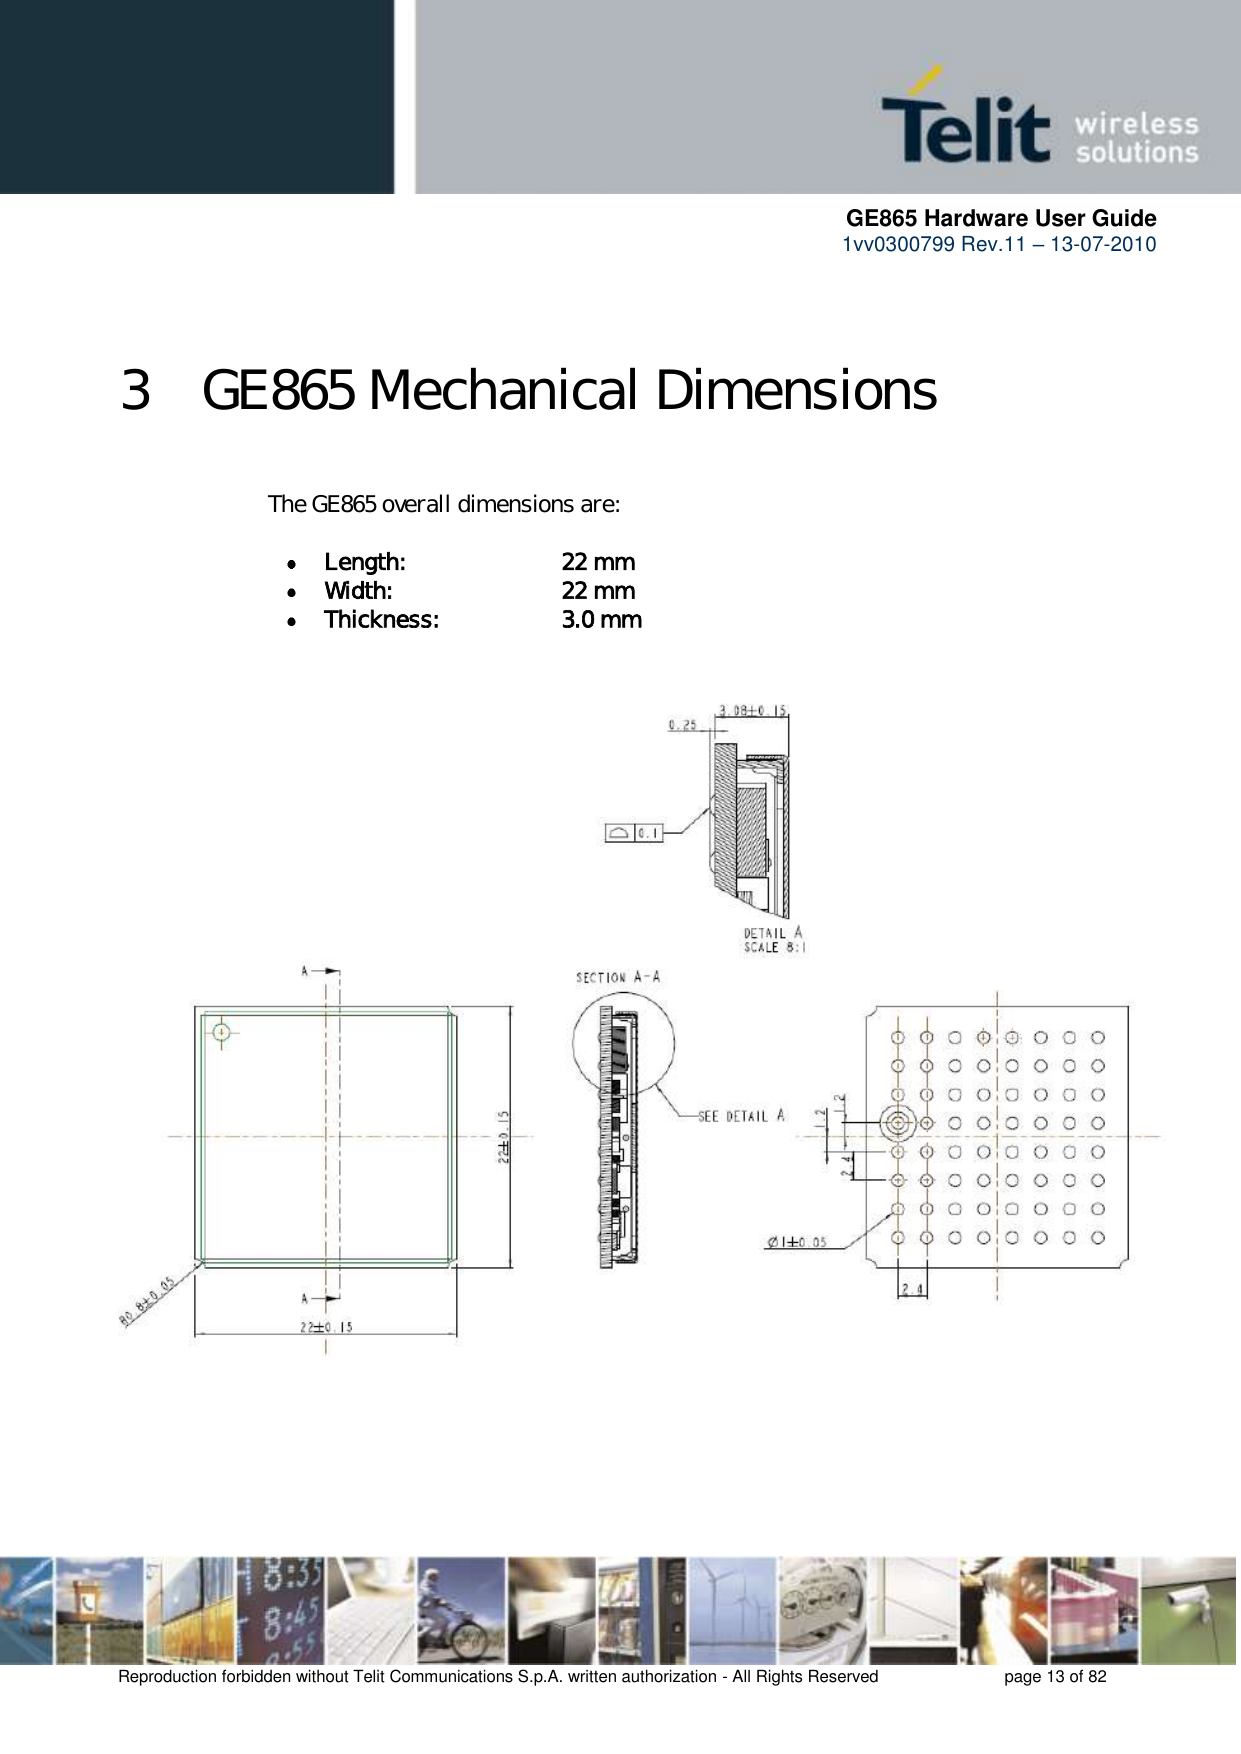      GE865 Hardware User Guide 1vv0300799 Rev.11 – 13-07-2010       Reproduction forbidden without Telit Communications S.p.A. written authorization - All Rights Reserved    page 13 of 82  3 GE865 Mechanical Dimensions  The GE865 overall dimensions are:   Length:     22 mm  Width:     22 mm   Thickness:     3.0 mm    